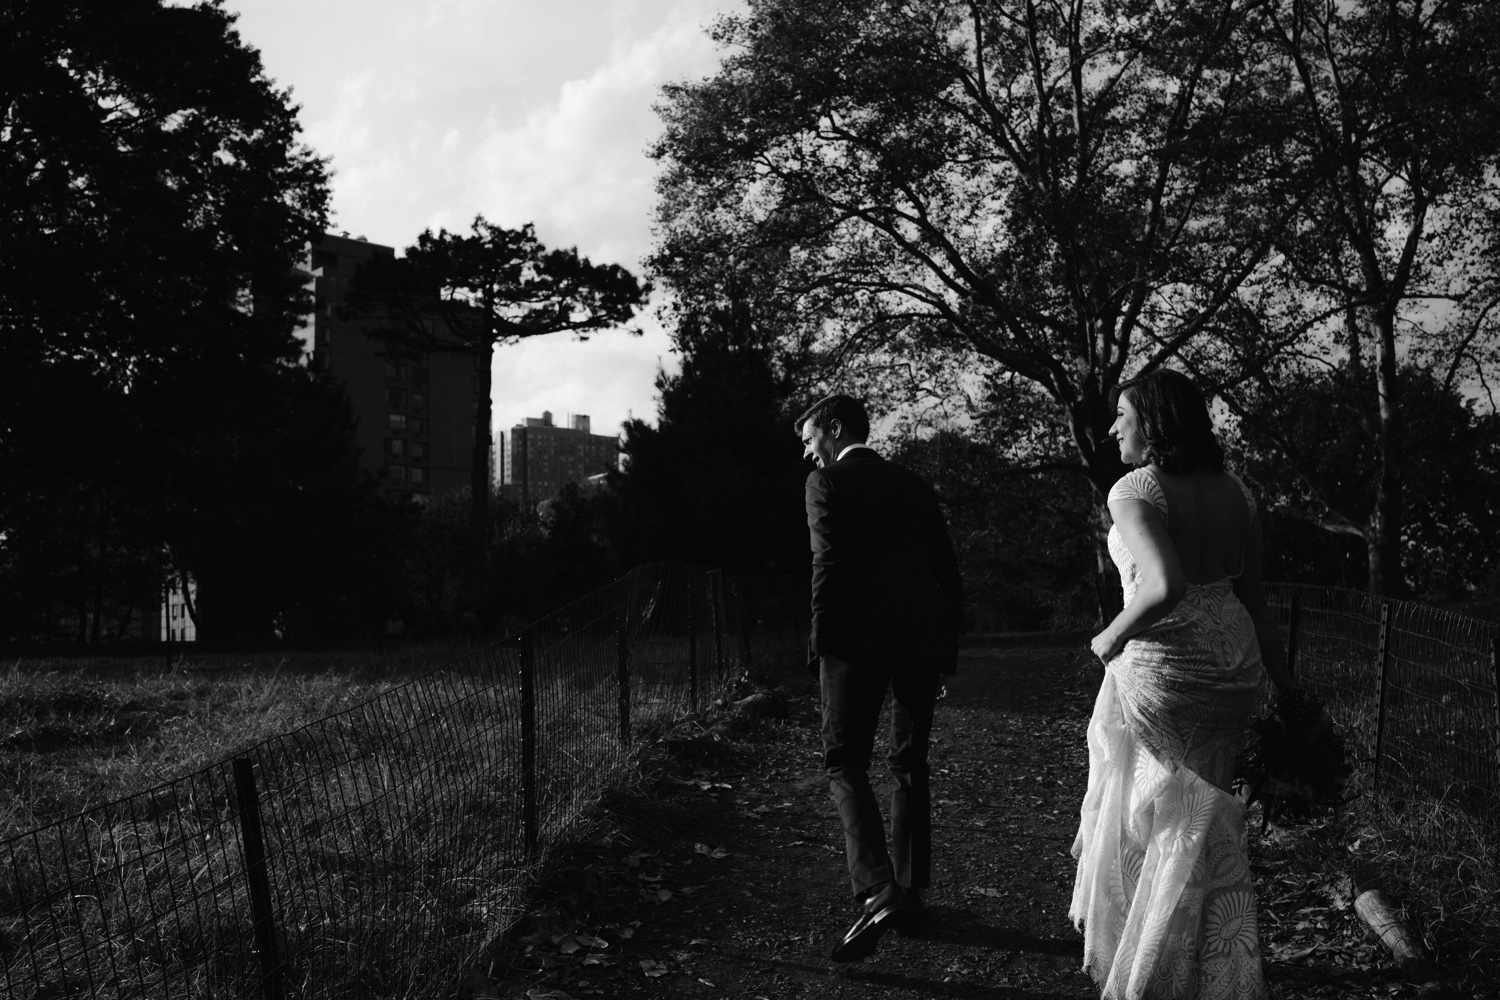 Intimate wedding at Fort Greene Park in Brooklyn